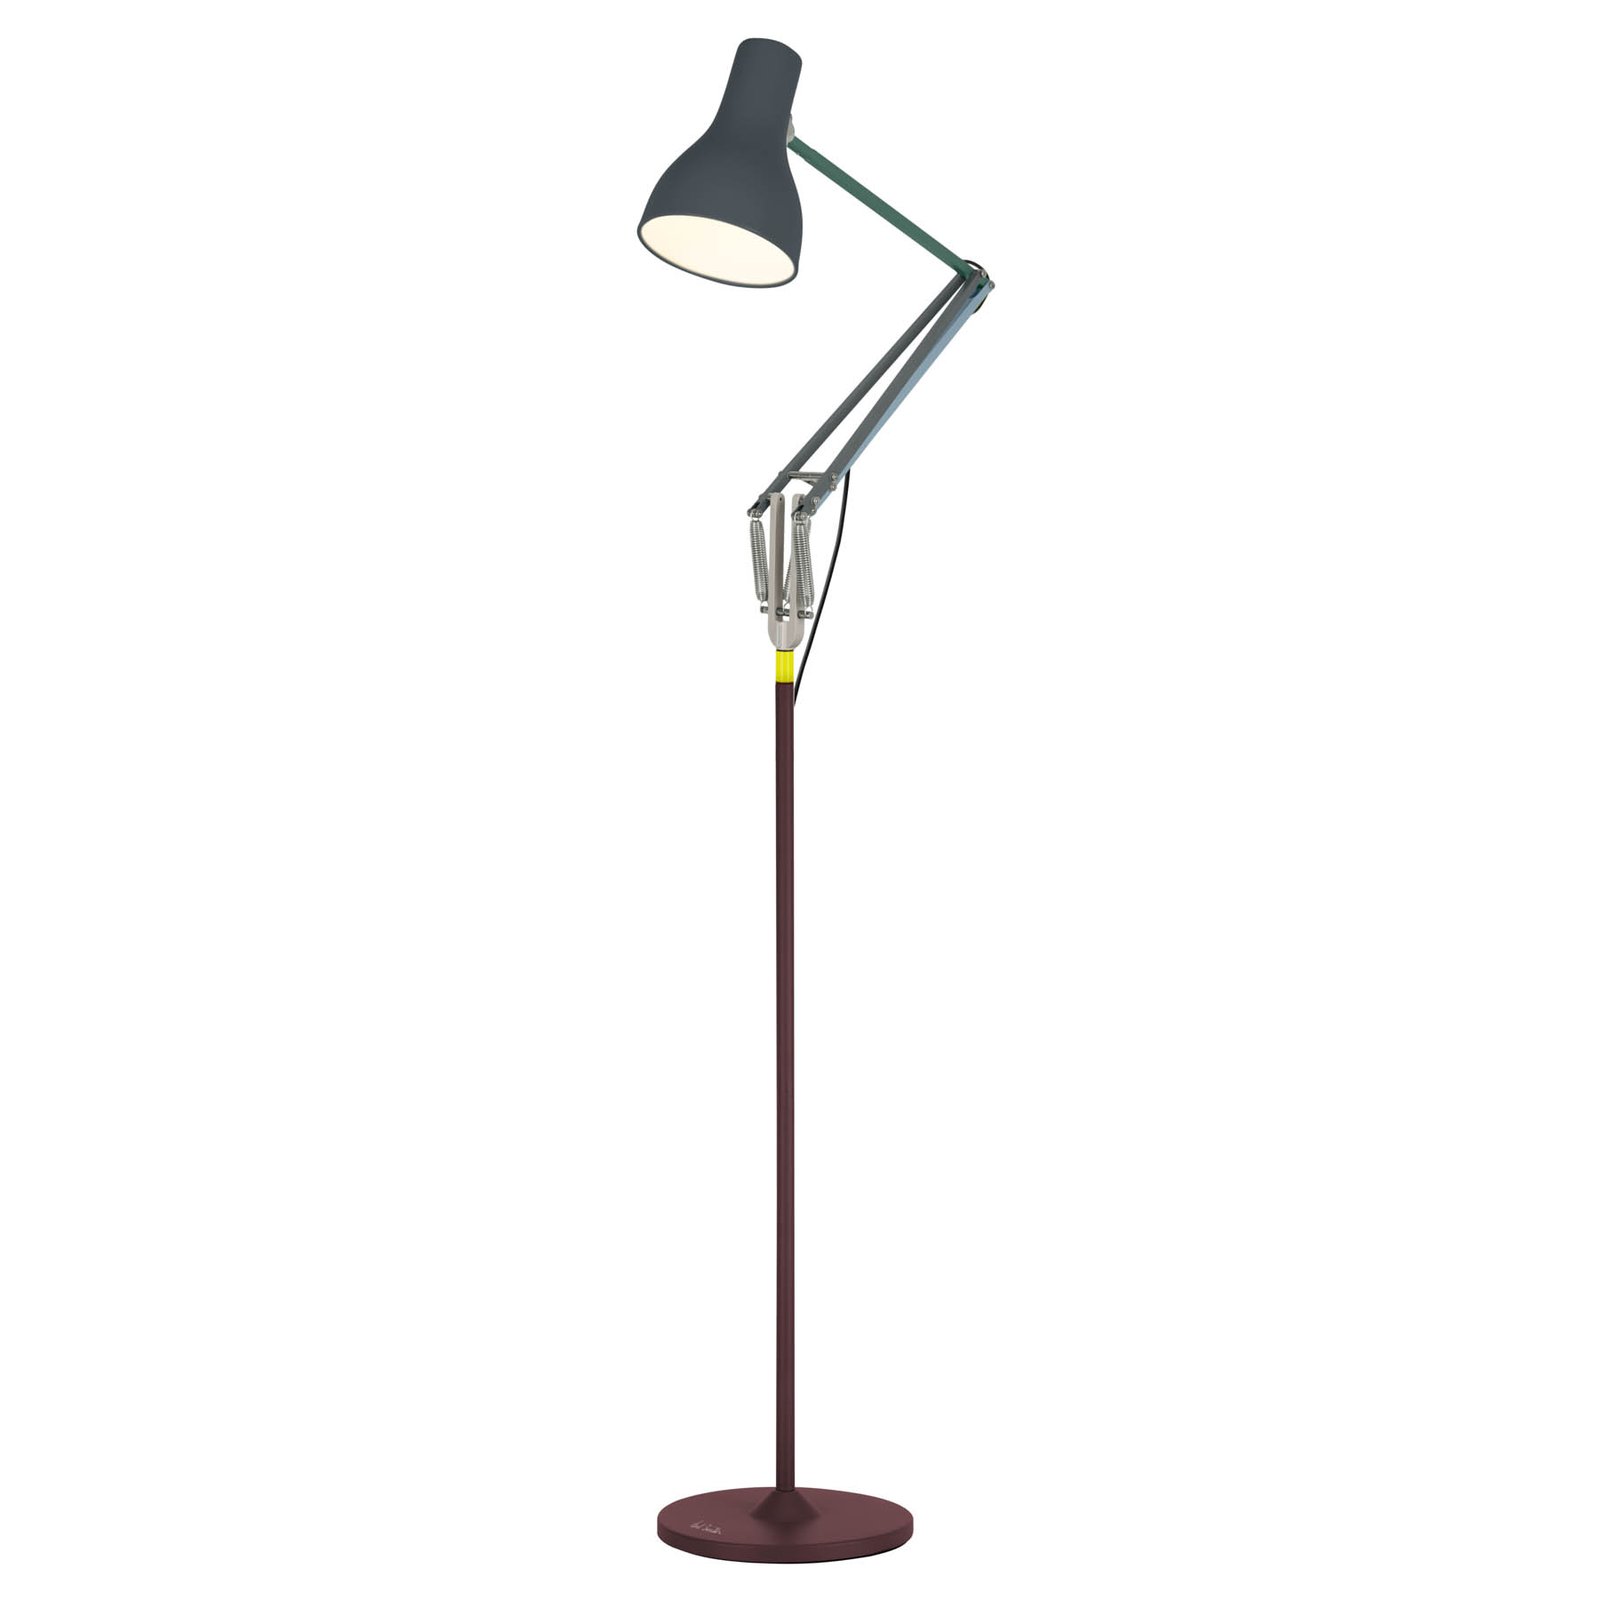 Anglepoise Type 75 Stehlampe Paul Smith Edition 4